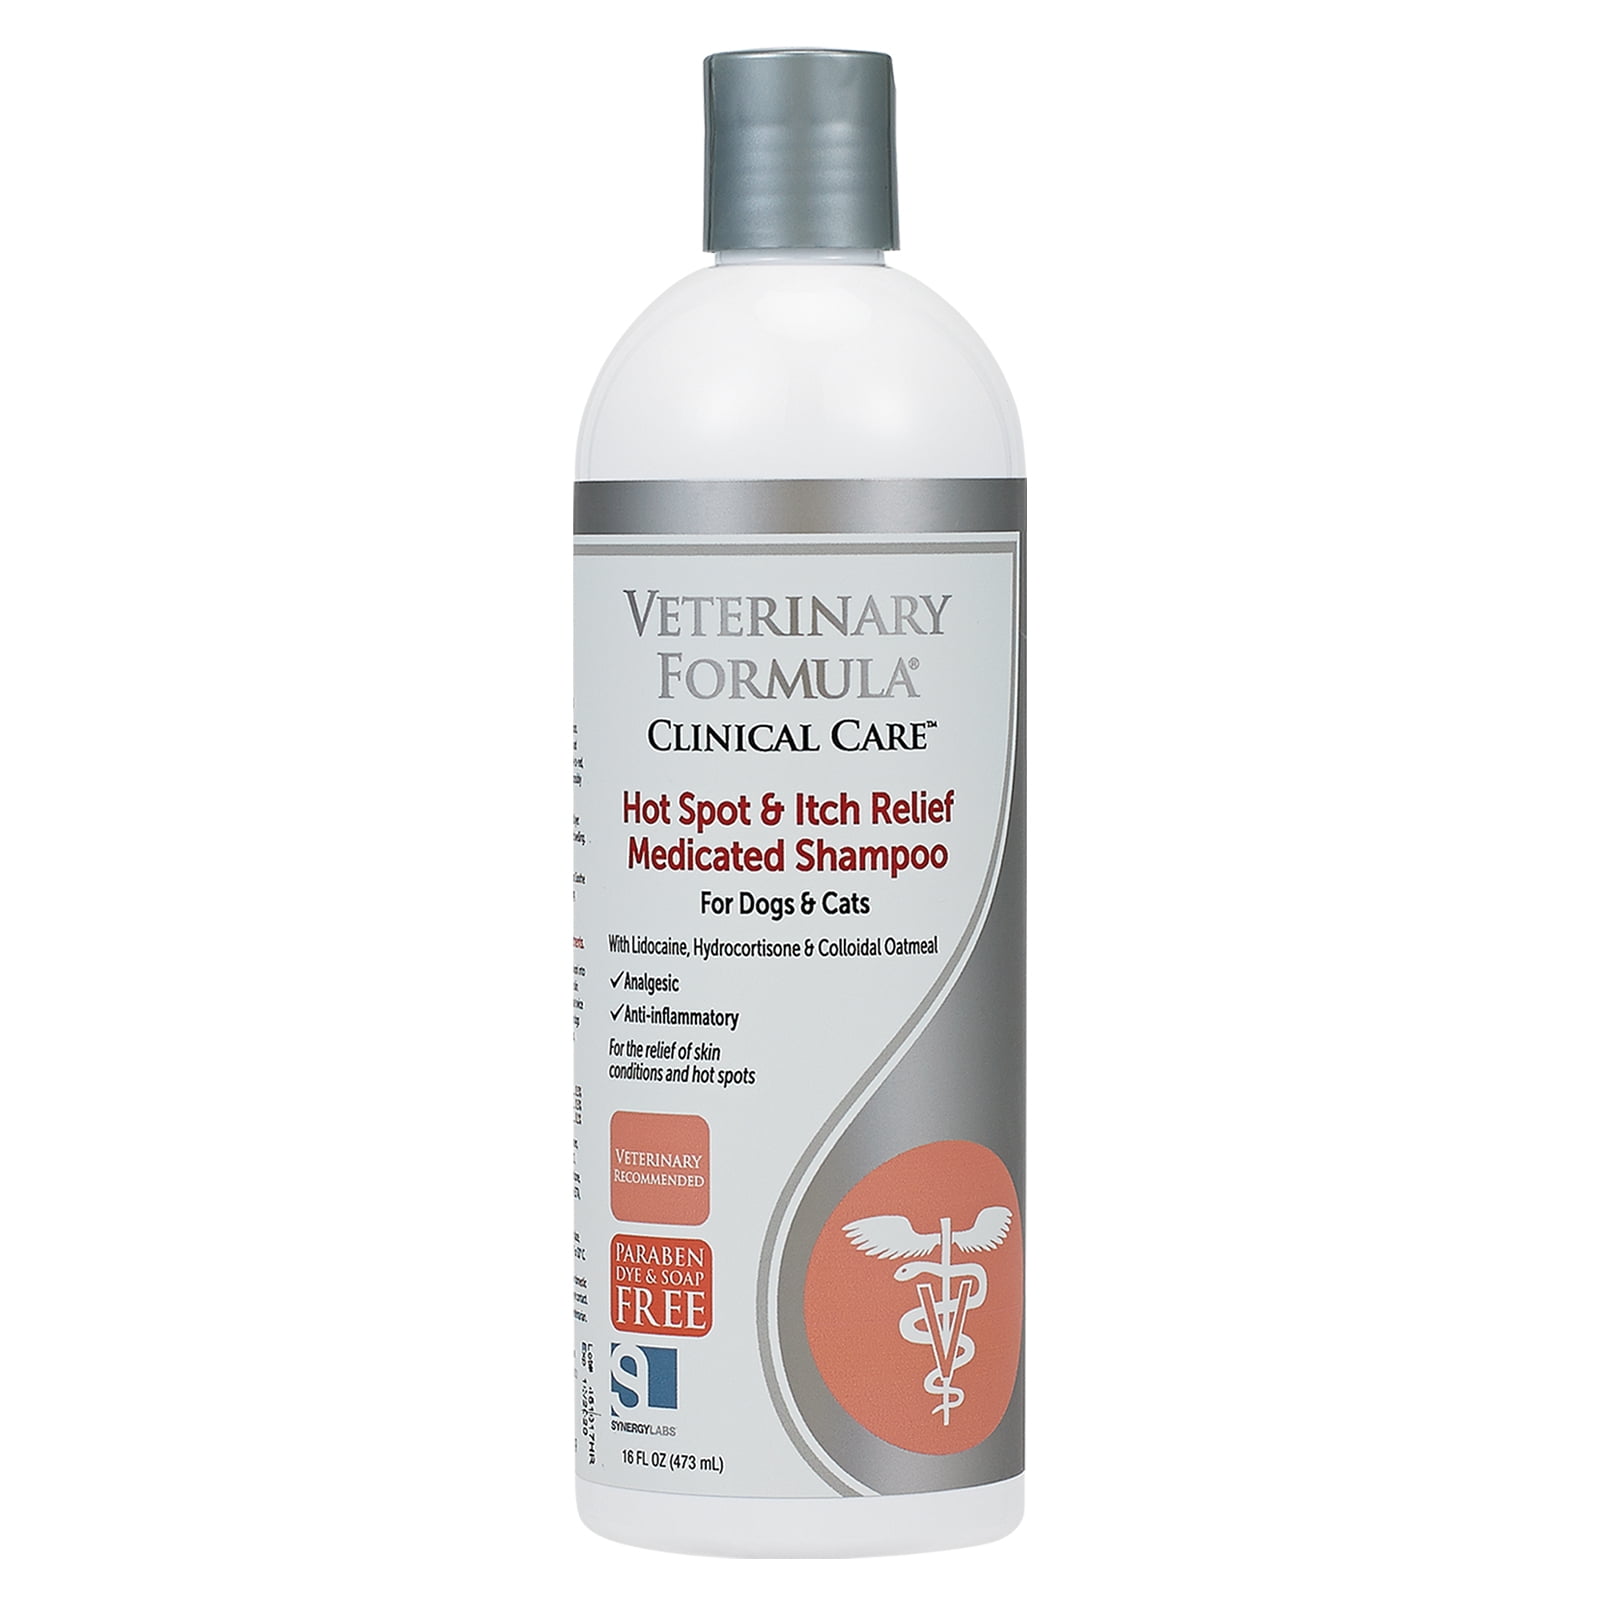 Veterinary Formula Clinical Care Hot Spot and Itch Relief Medicated Shampoo for Dogs & Cats